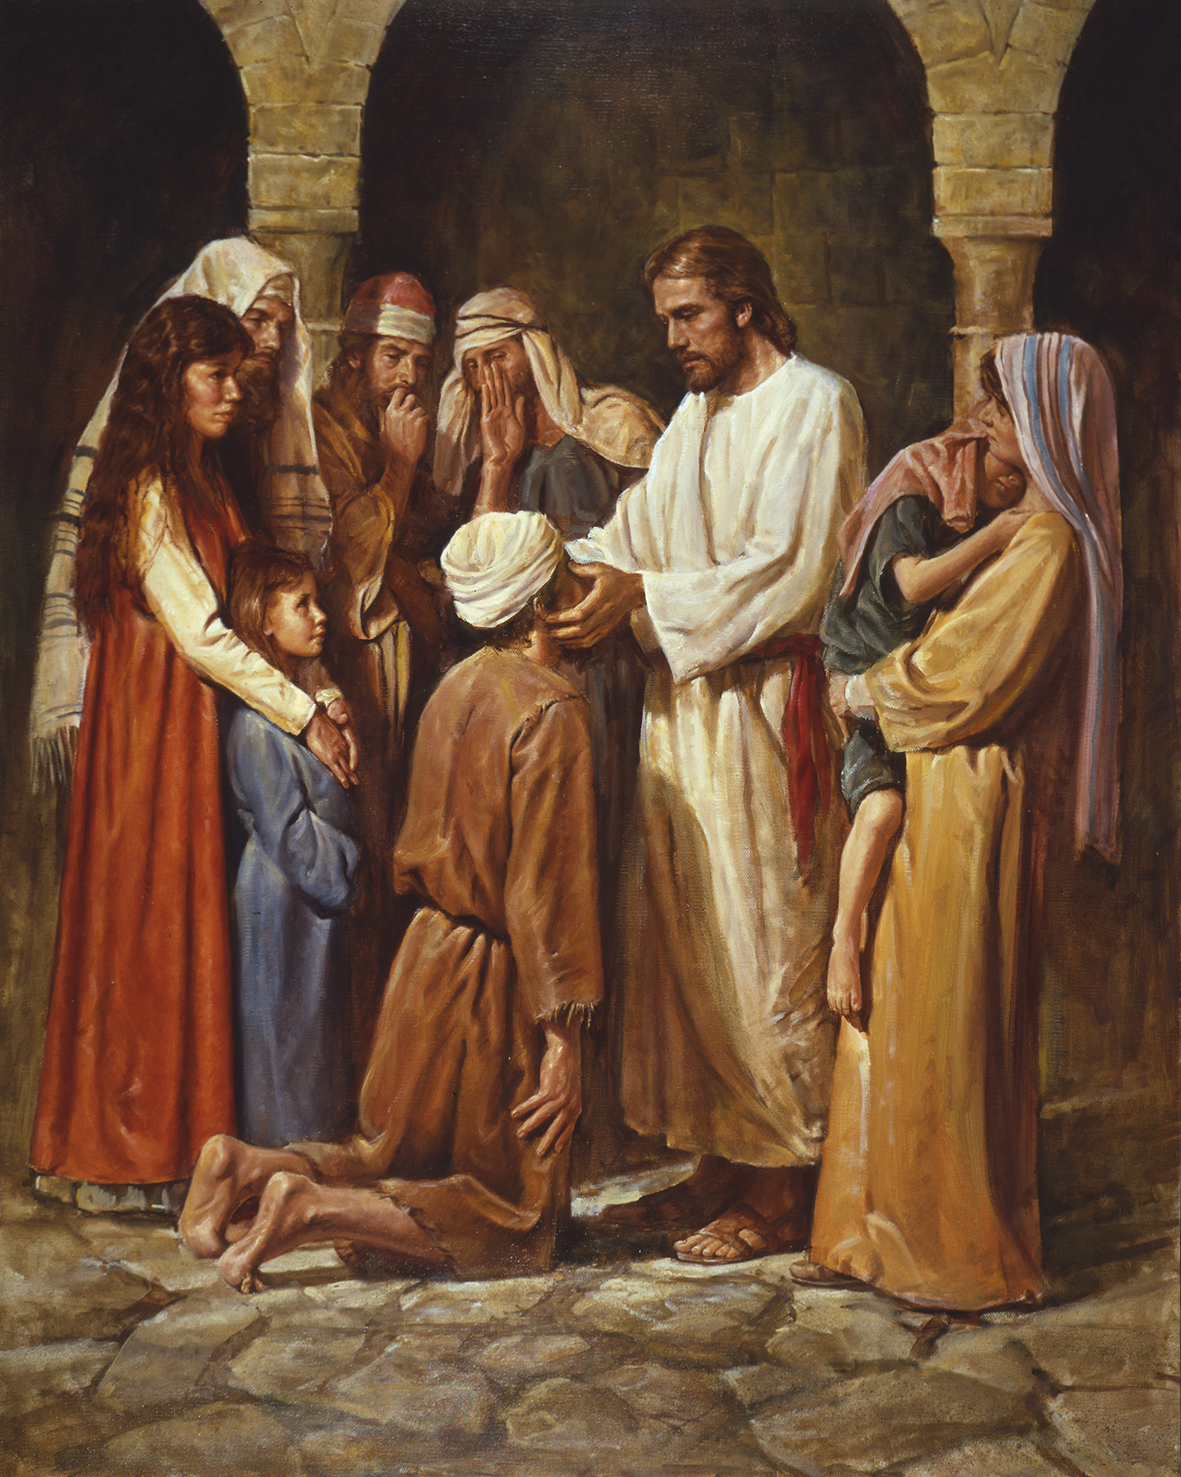 christ-healing-the-blind-man-by-del-parson